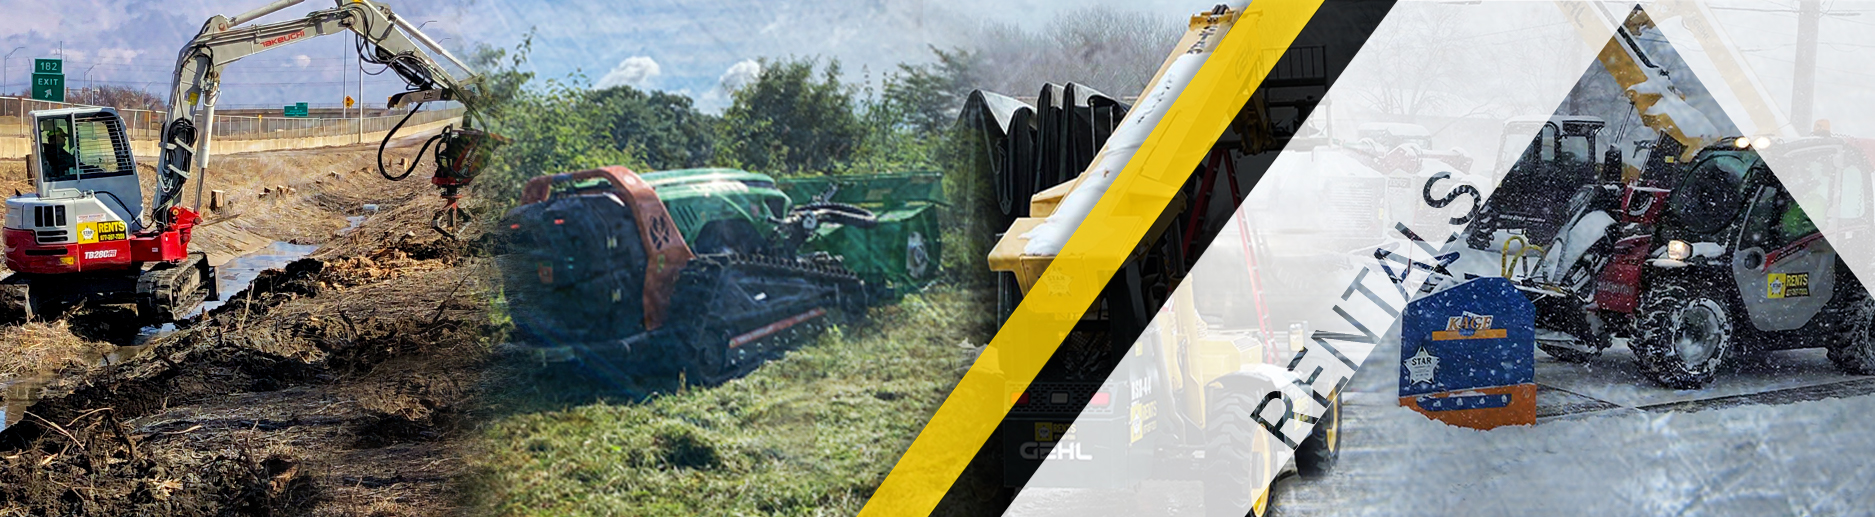 skid loaders, track loaders, telehadlers, air compressors, and more for rent in iowa.